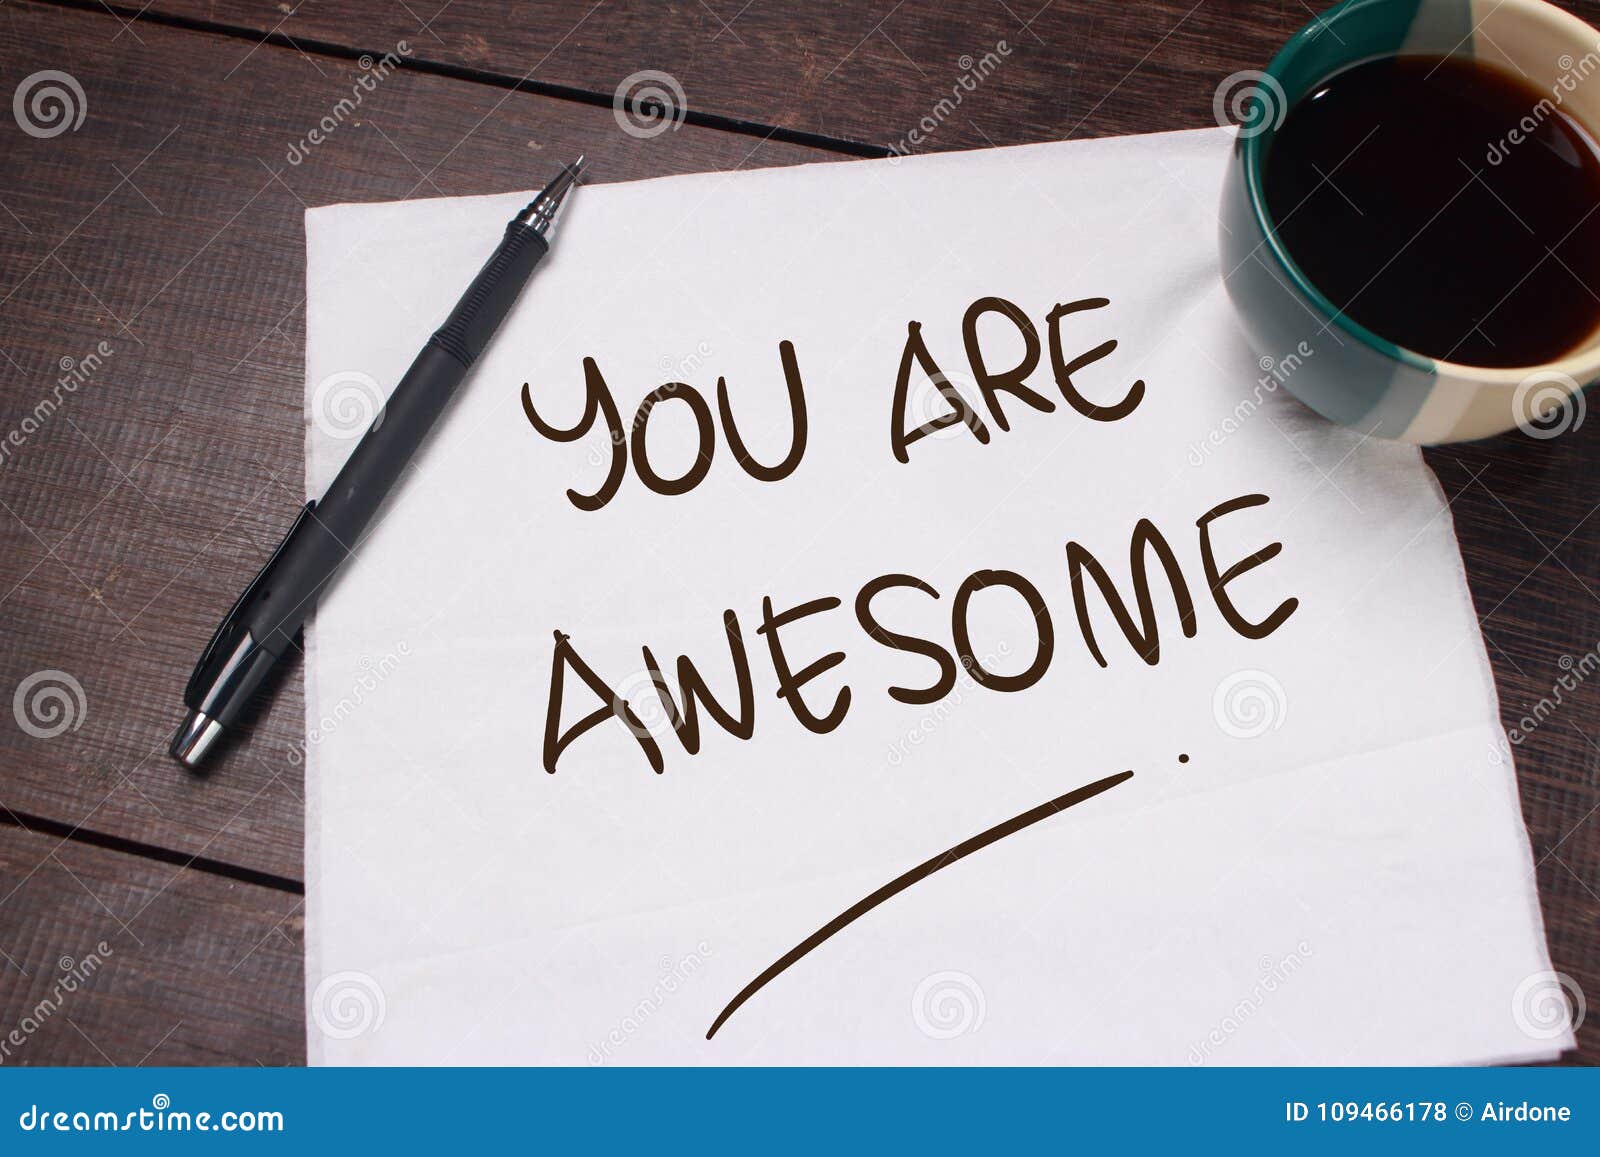 you are awesome. motivational text